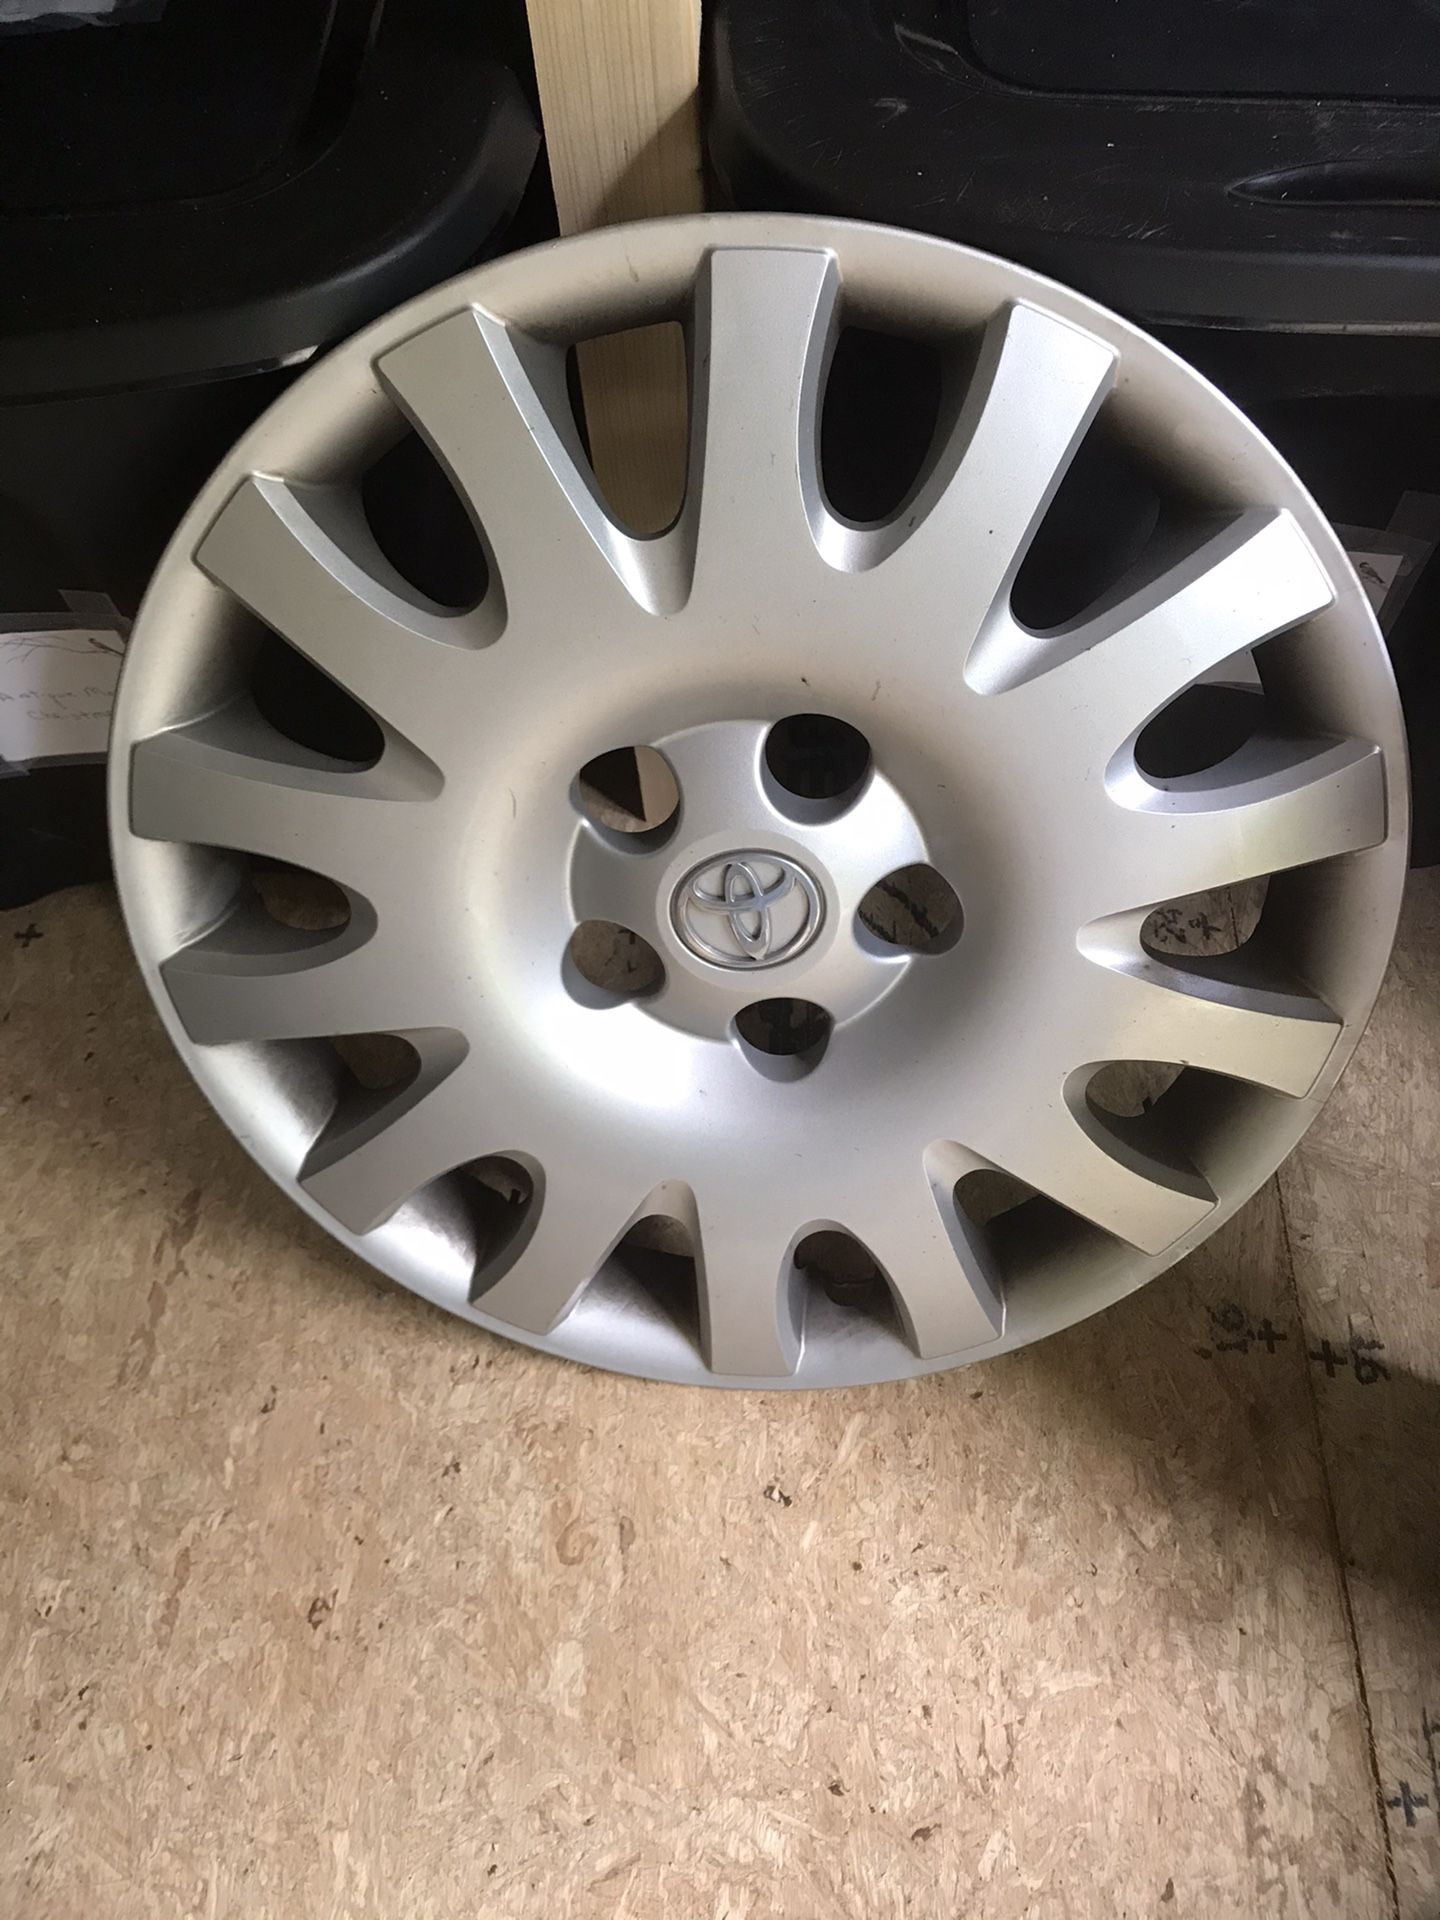 05 Camry hubcaps. 16” $15each or 4/50